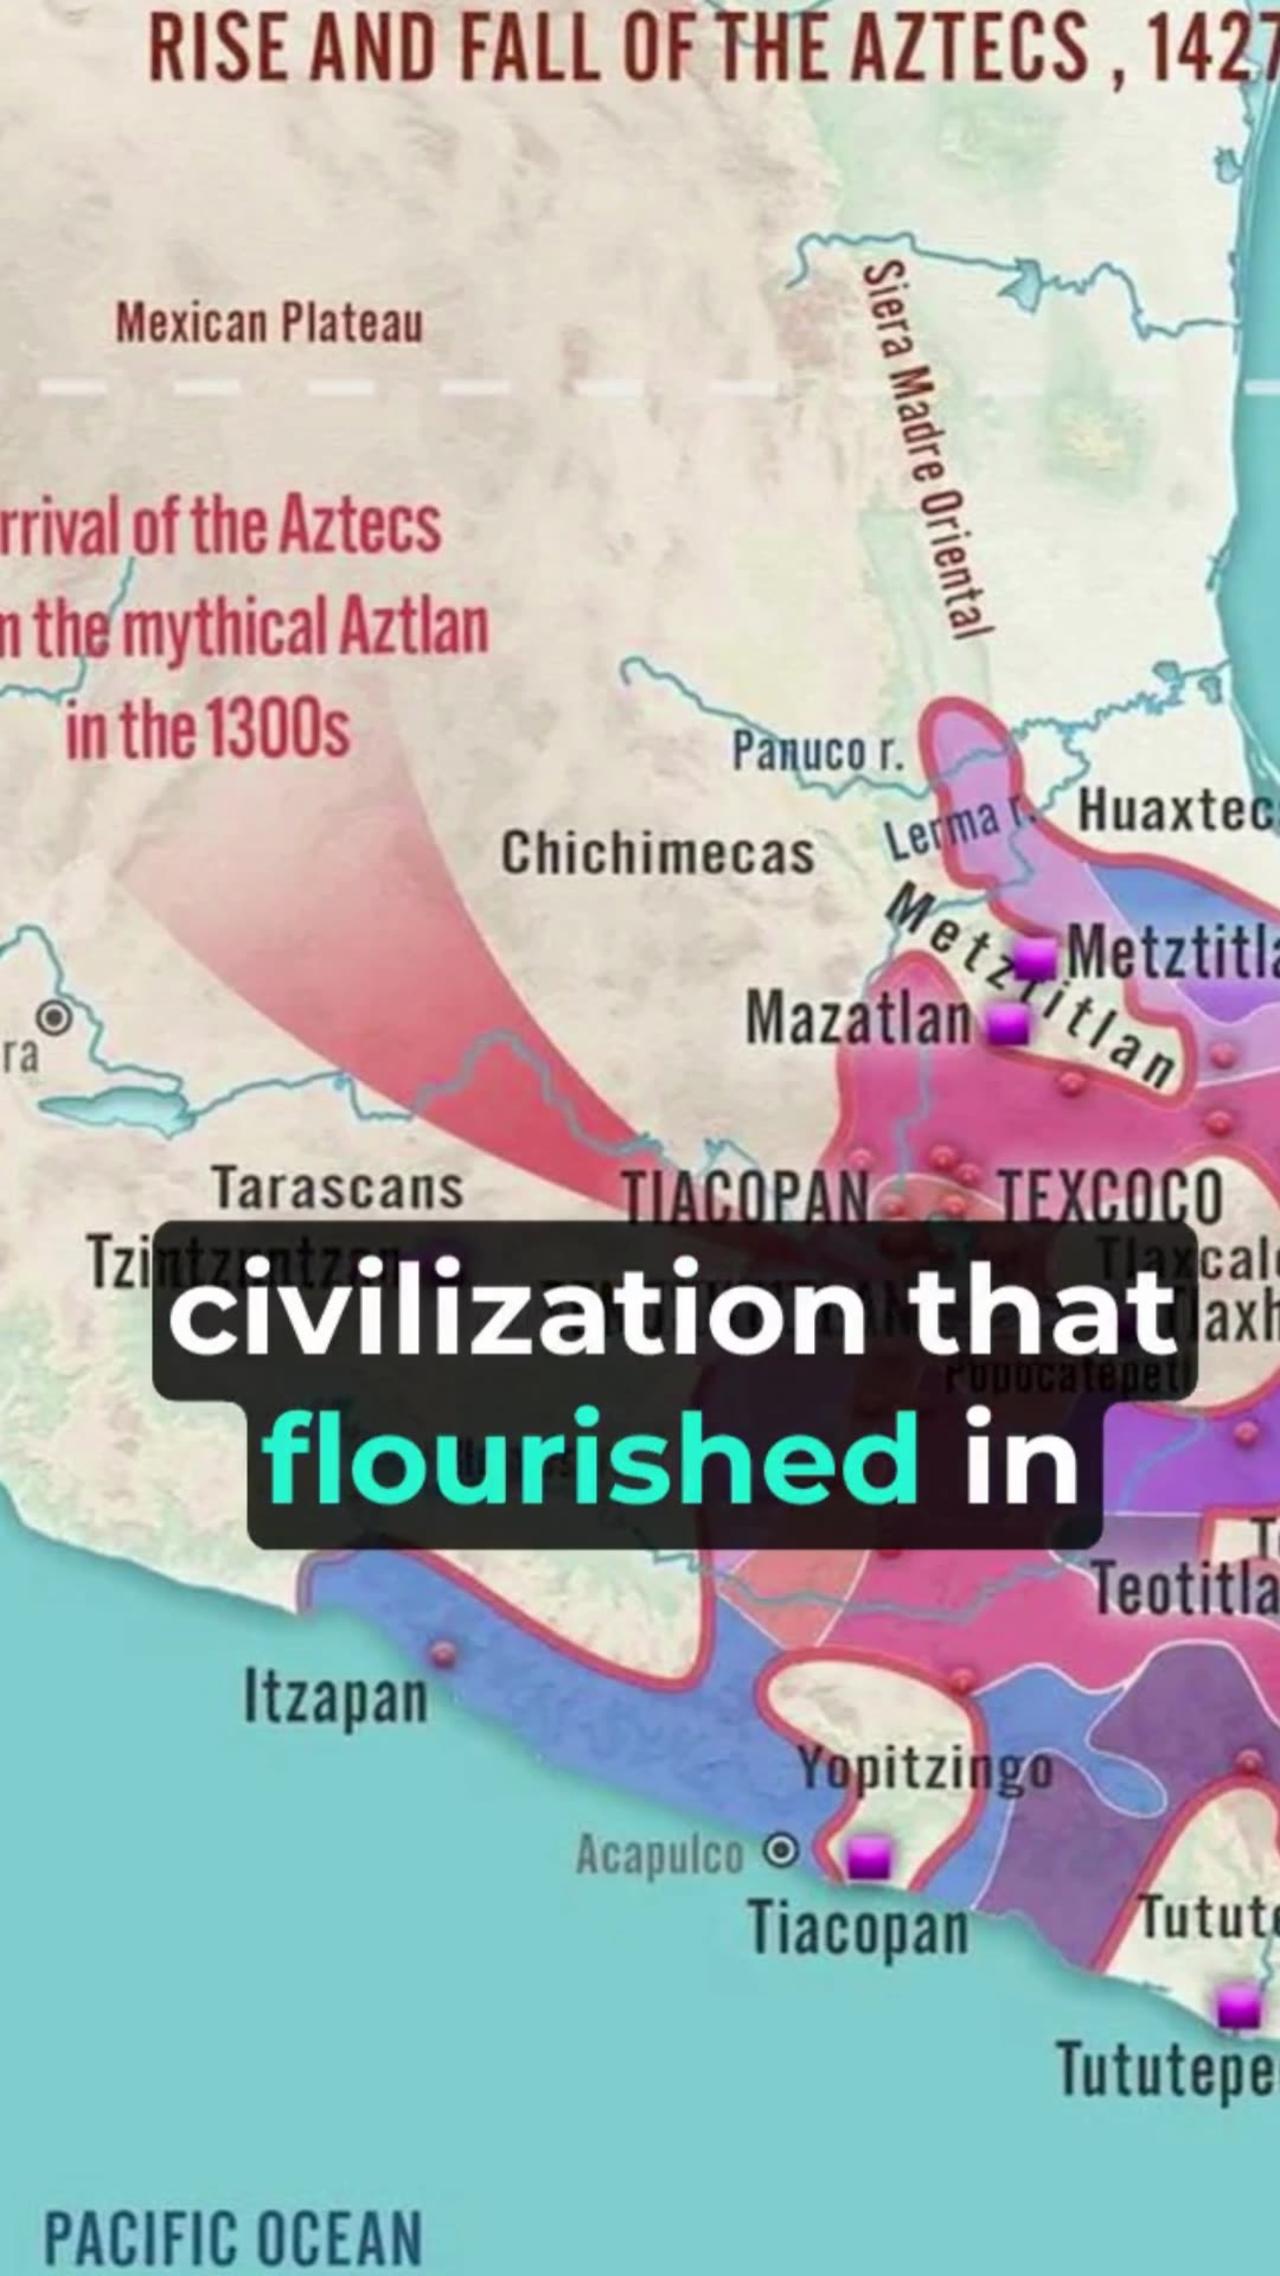 The Aztecs: A Short History of One of the Most Impressive Mesoamerican Civilizations | #shorts